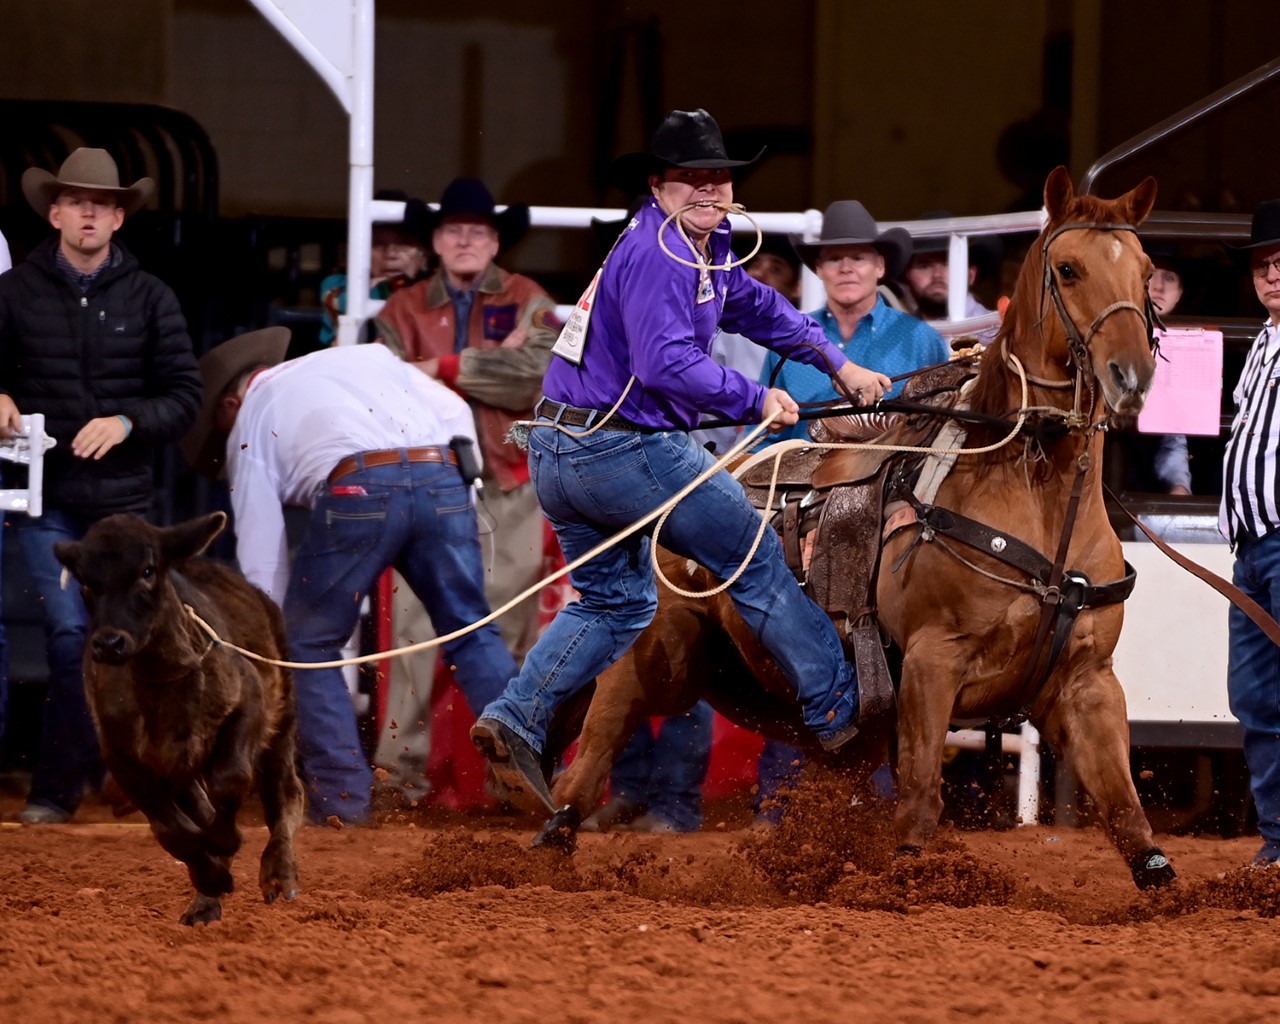 Westyn Hughes steps off his horse to tie-down this calf at Fort Worth Stock Show & Rodeo.